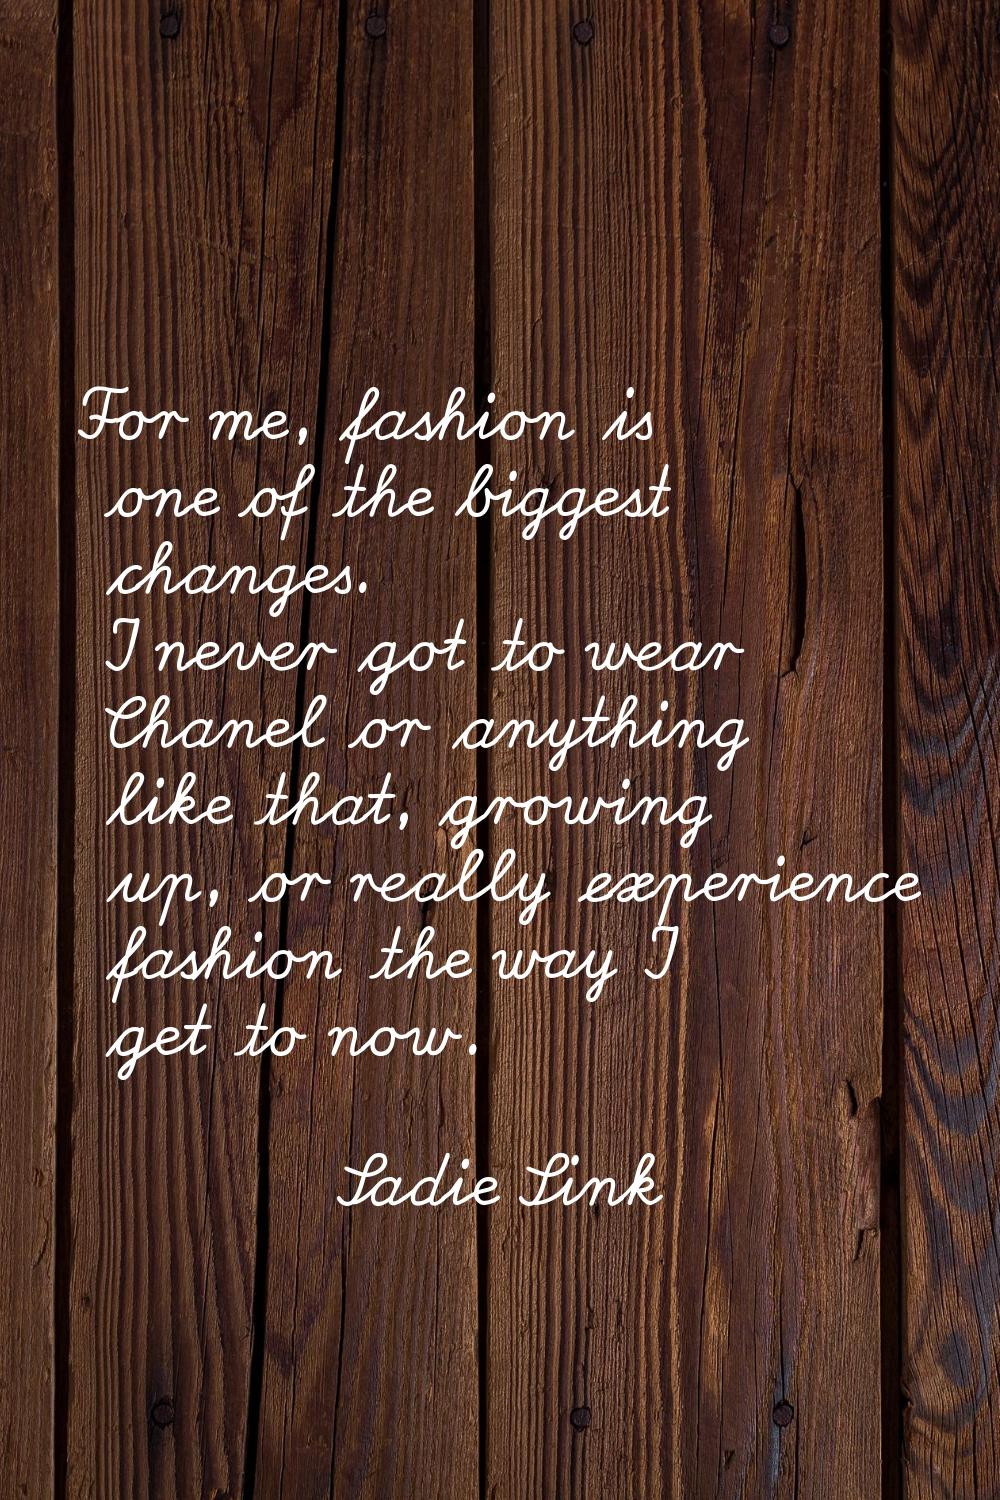 For me, fashion is one of the biggest changes. I never got to wear Chanel or anything like that, gr